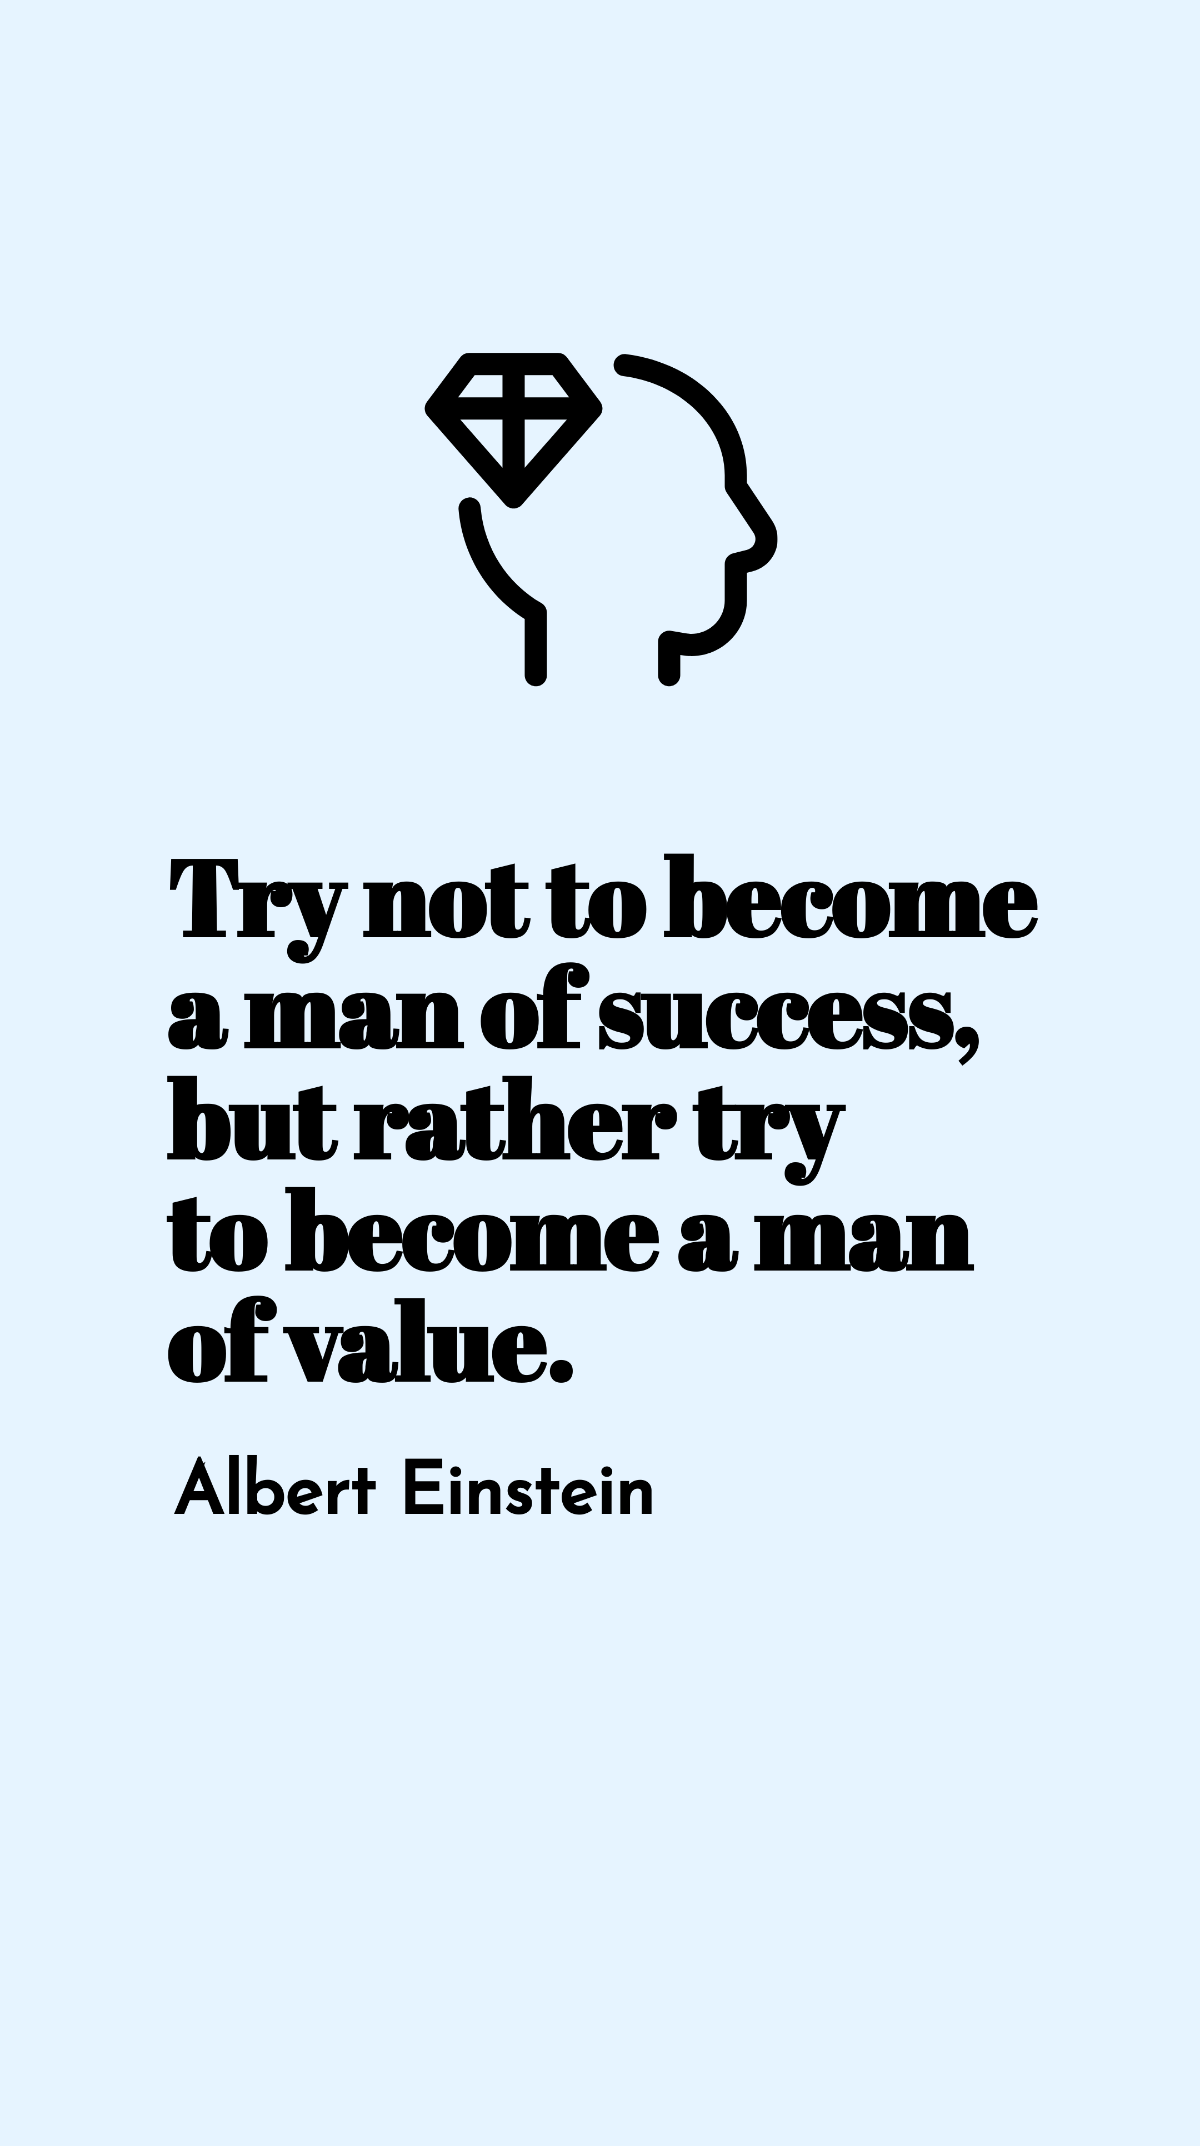 Free Albert Einstein - Try not to become a man of success, but rather try to become a man of value. Template